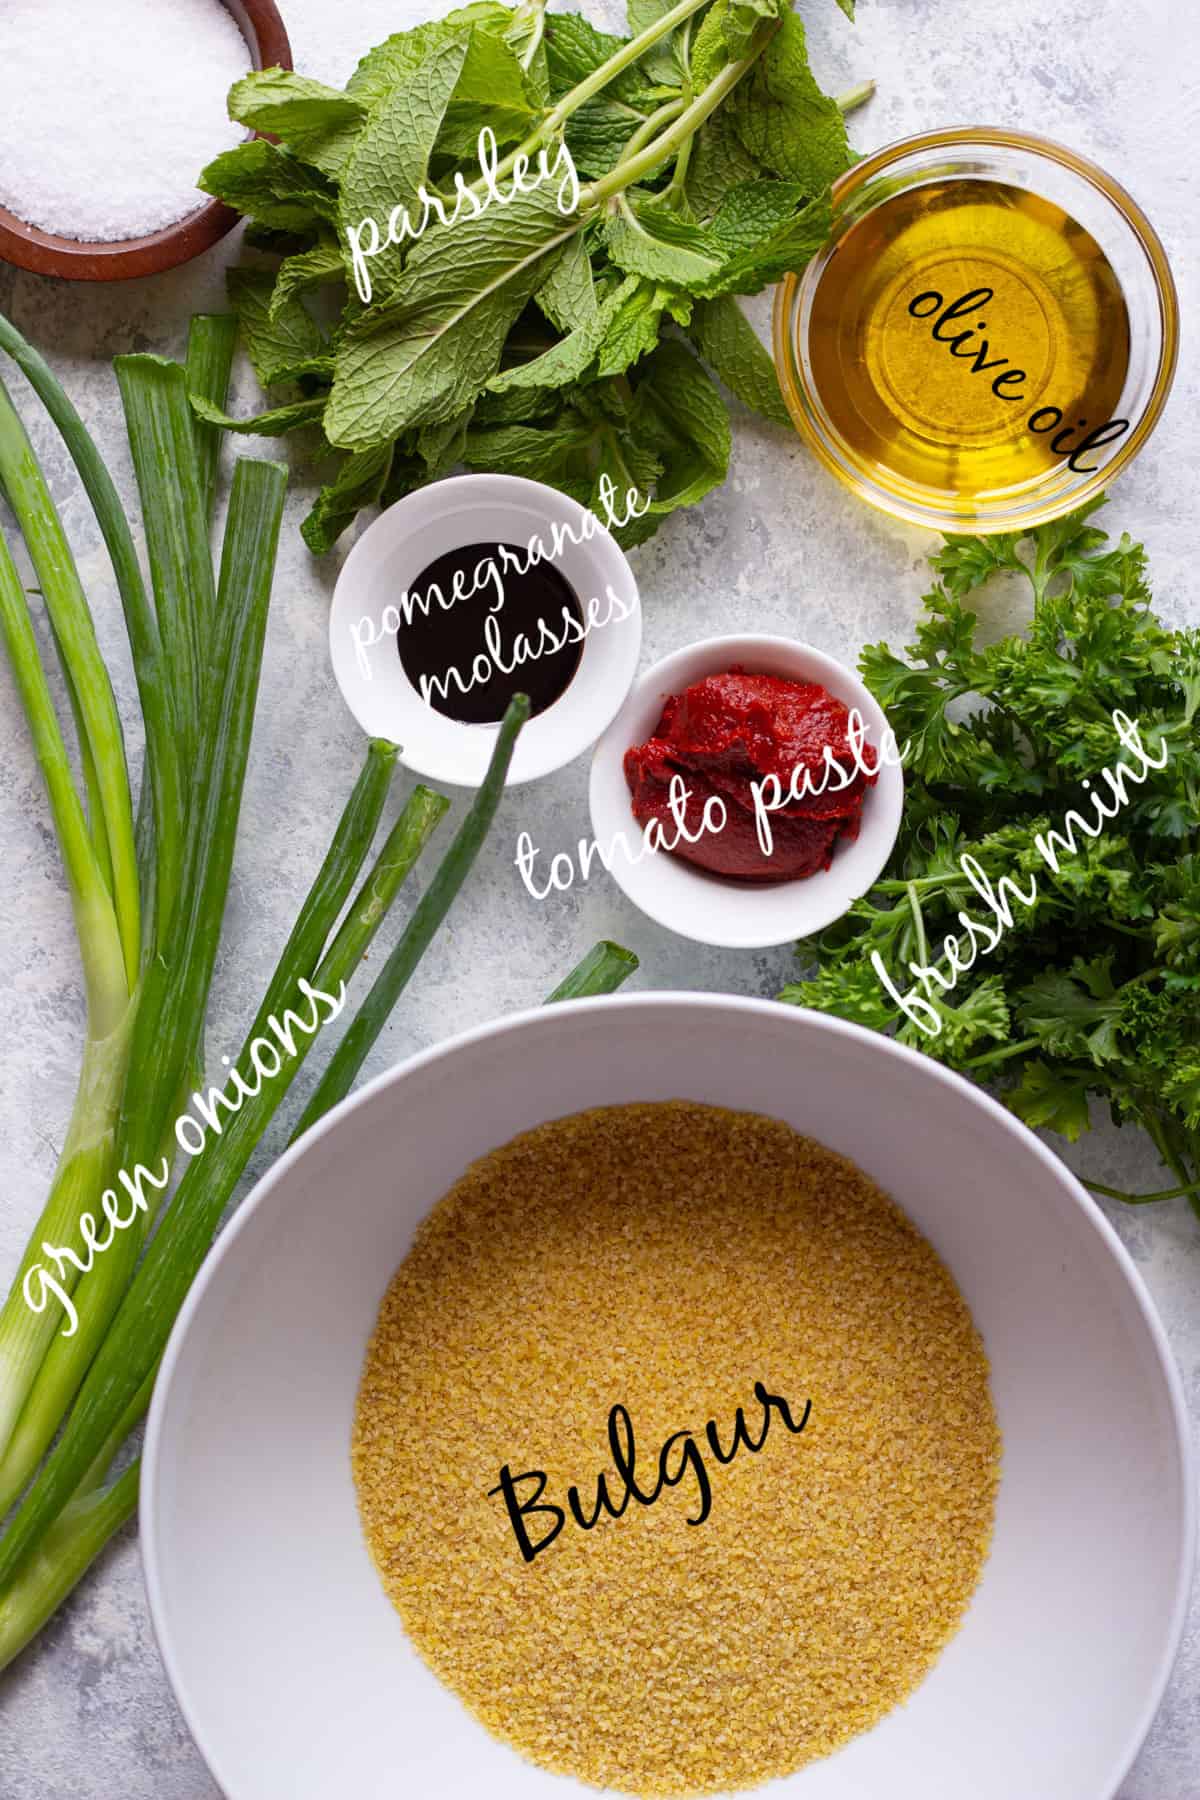 to make Turkish bulgur salad kisir your need bulgur, green onions, parsley and mint. You also need tomato paste, pomegranate molasses and olive oil .